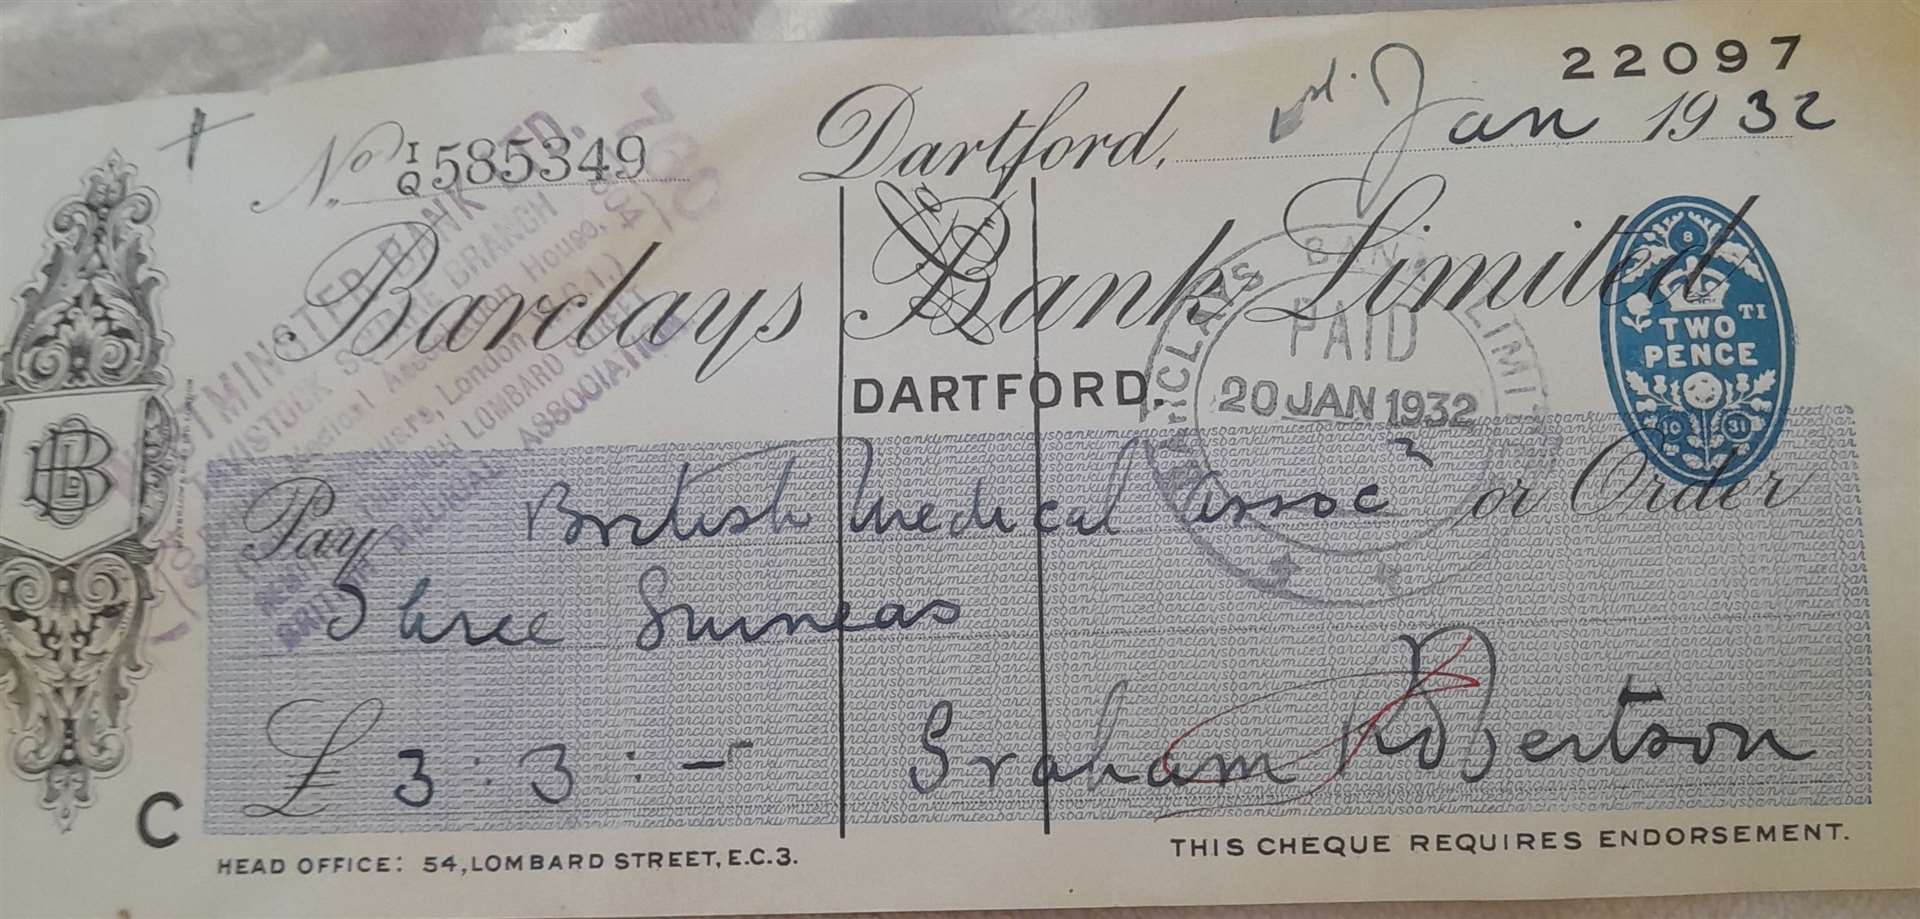 Liz Edgar found the almost 90-year-old cheque in her loft in Charles Street